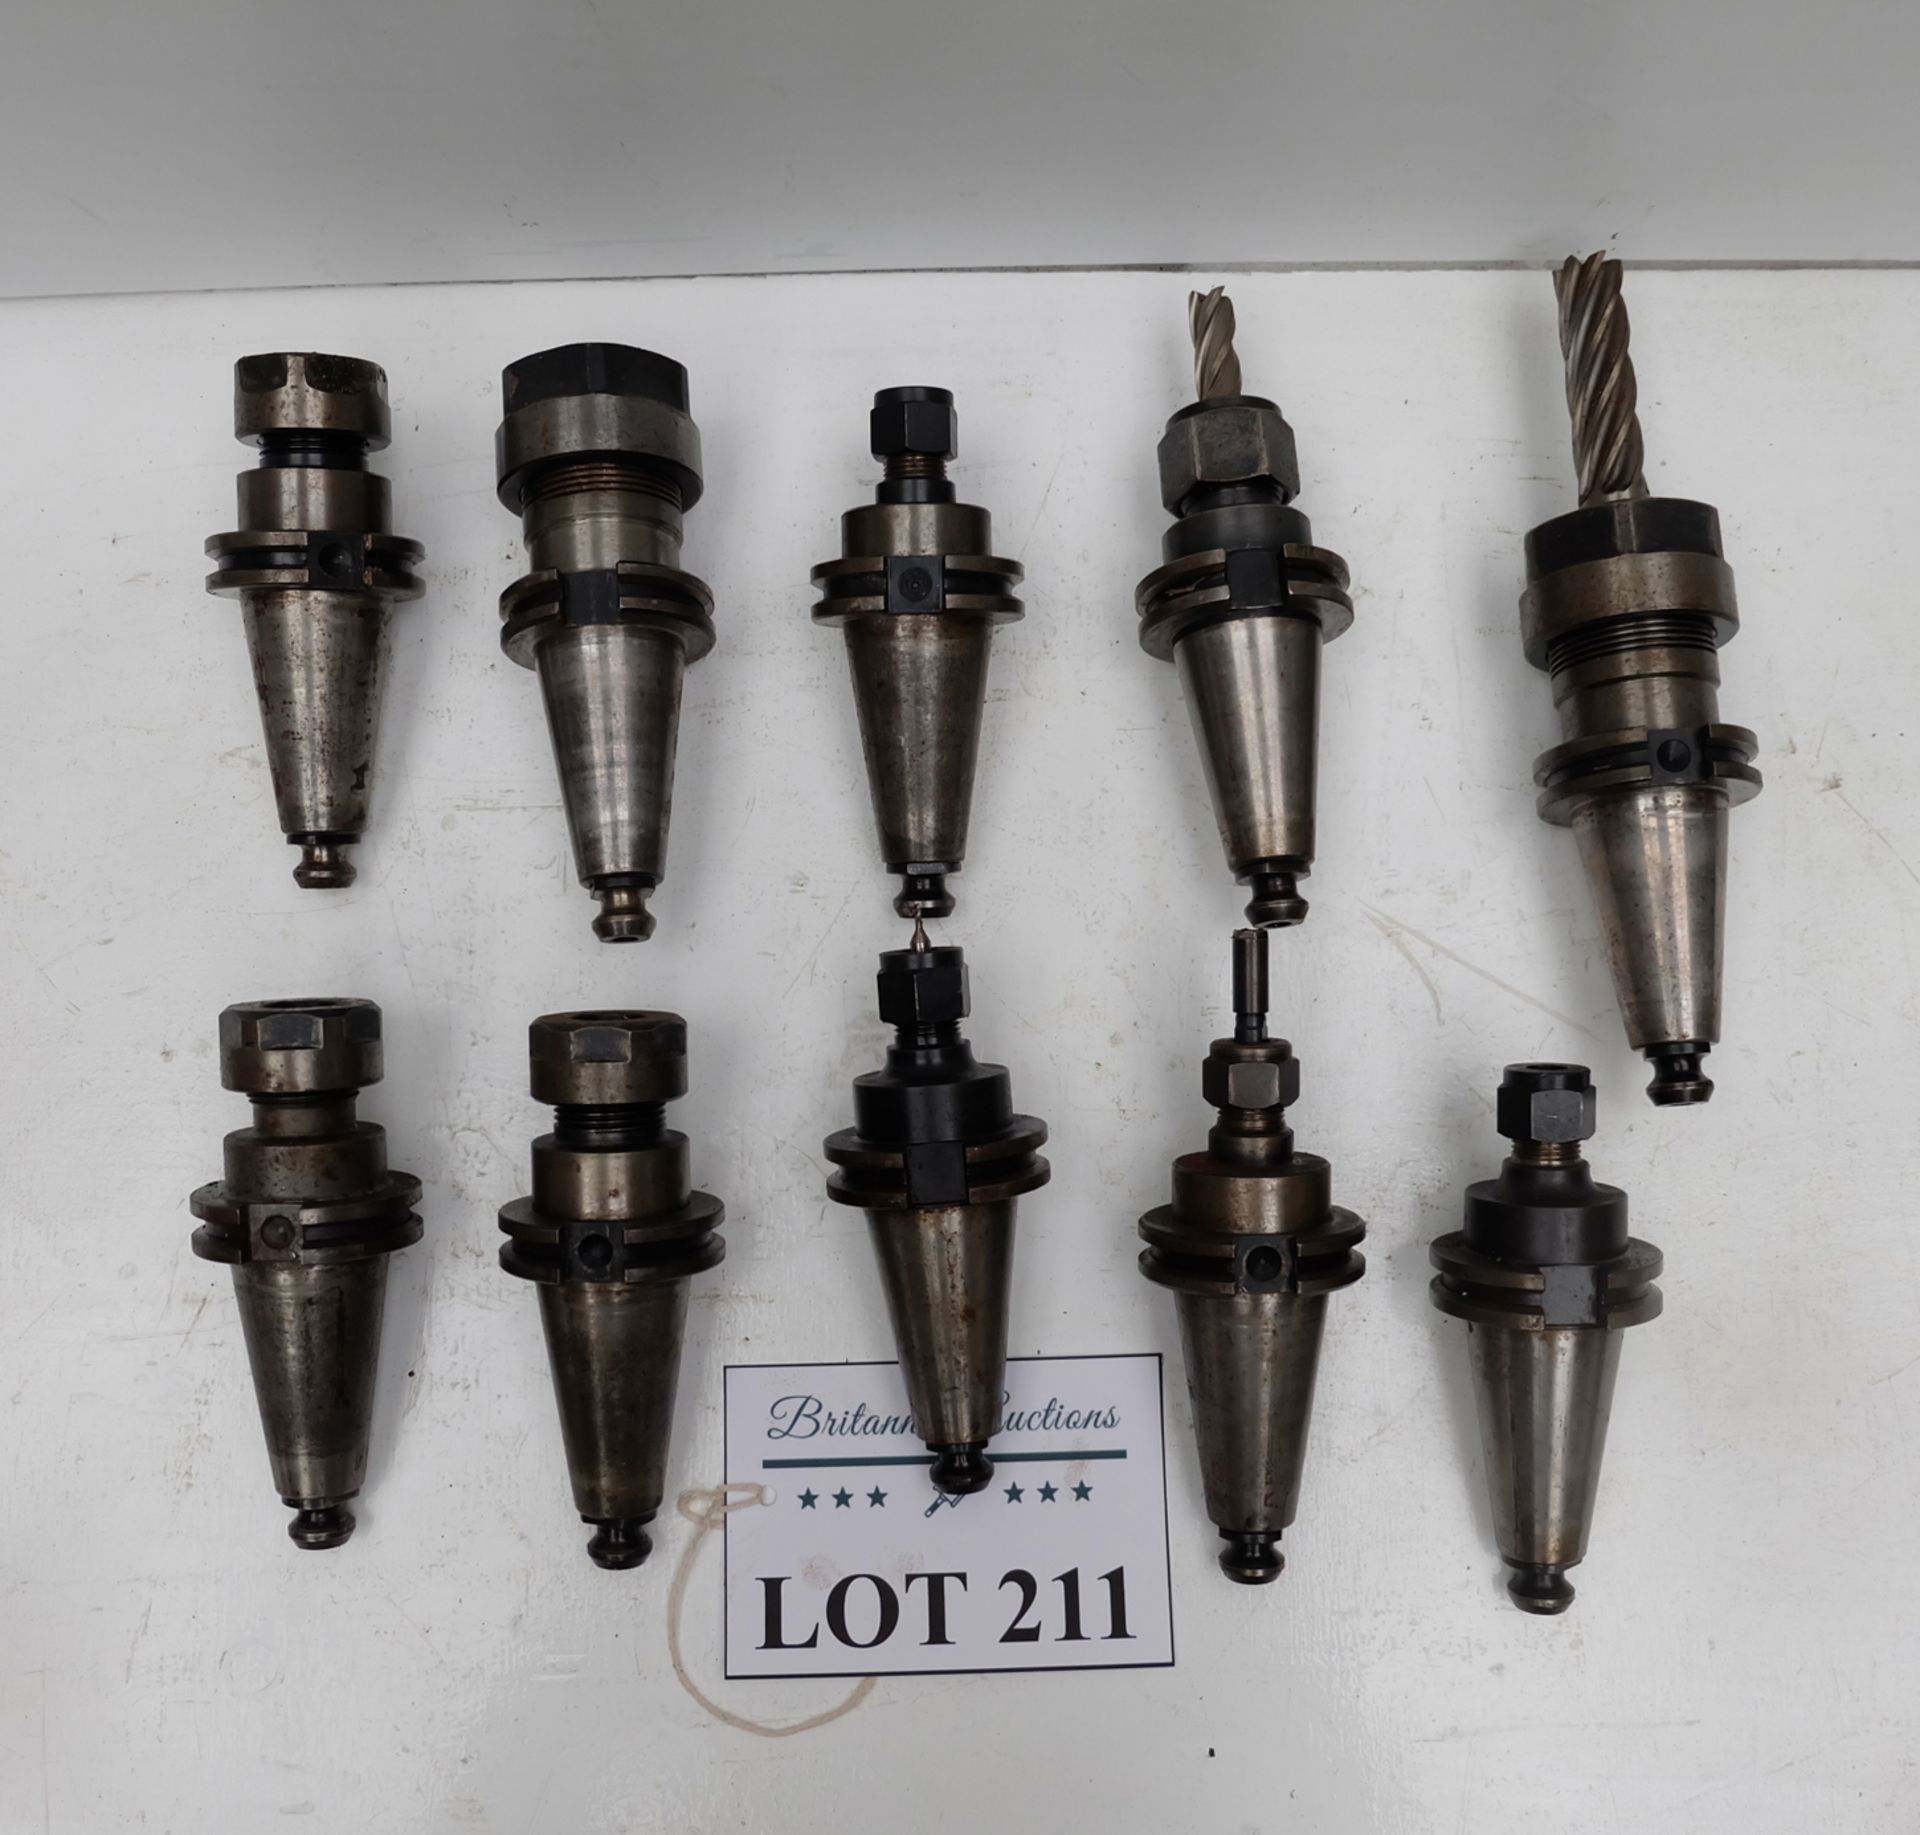 Quantity of 10 x Cat 40 Spindle Tooling.